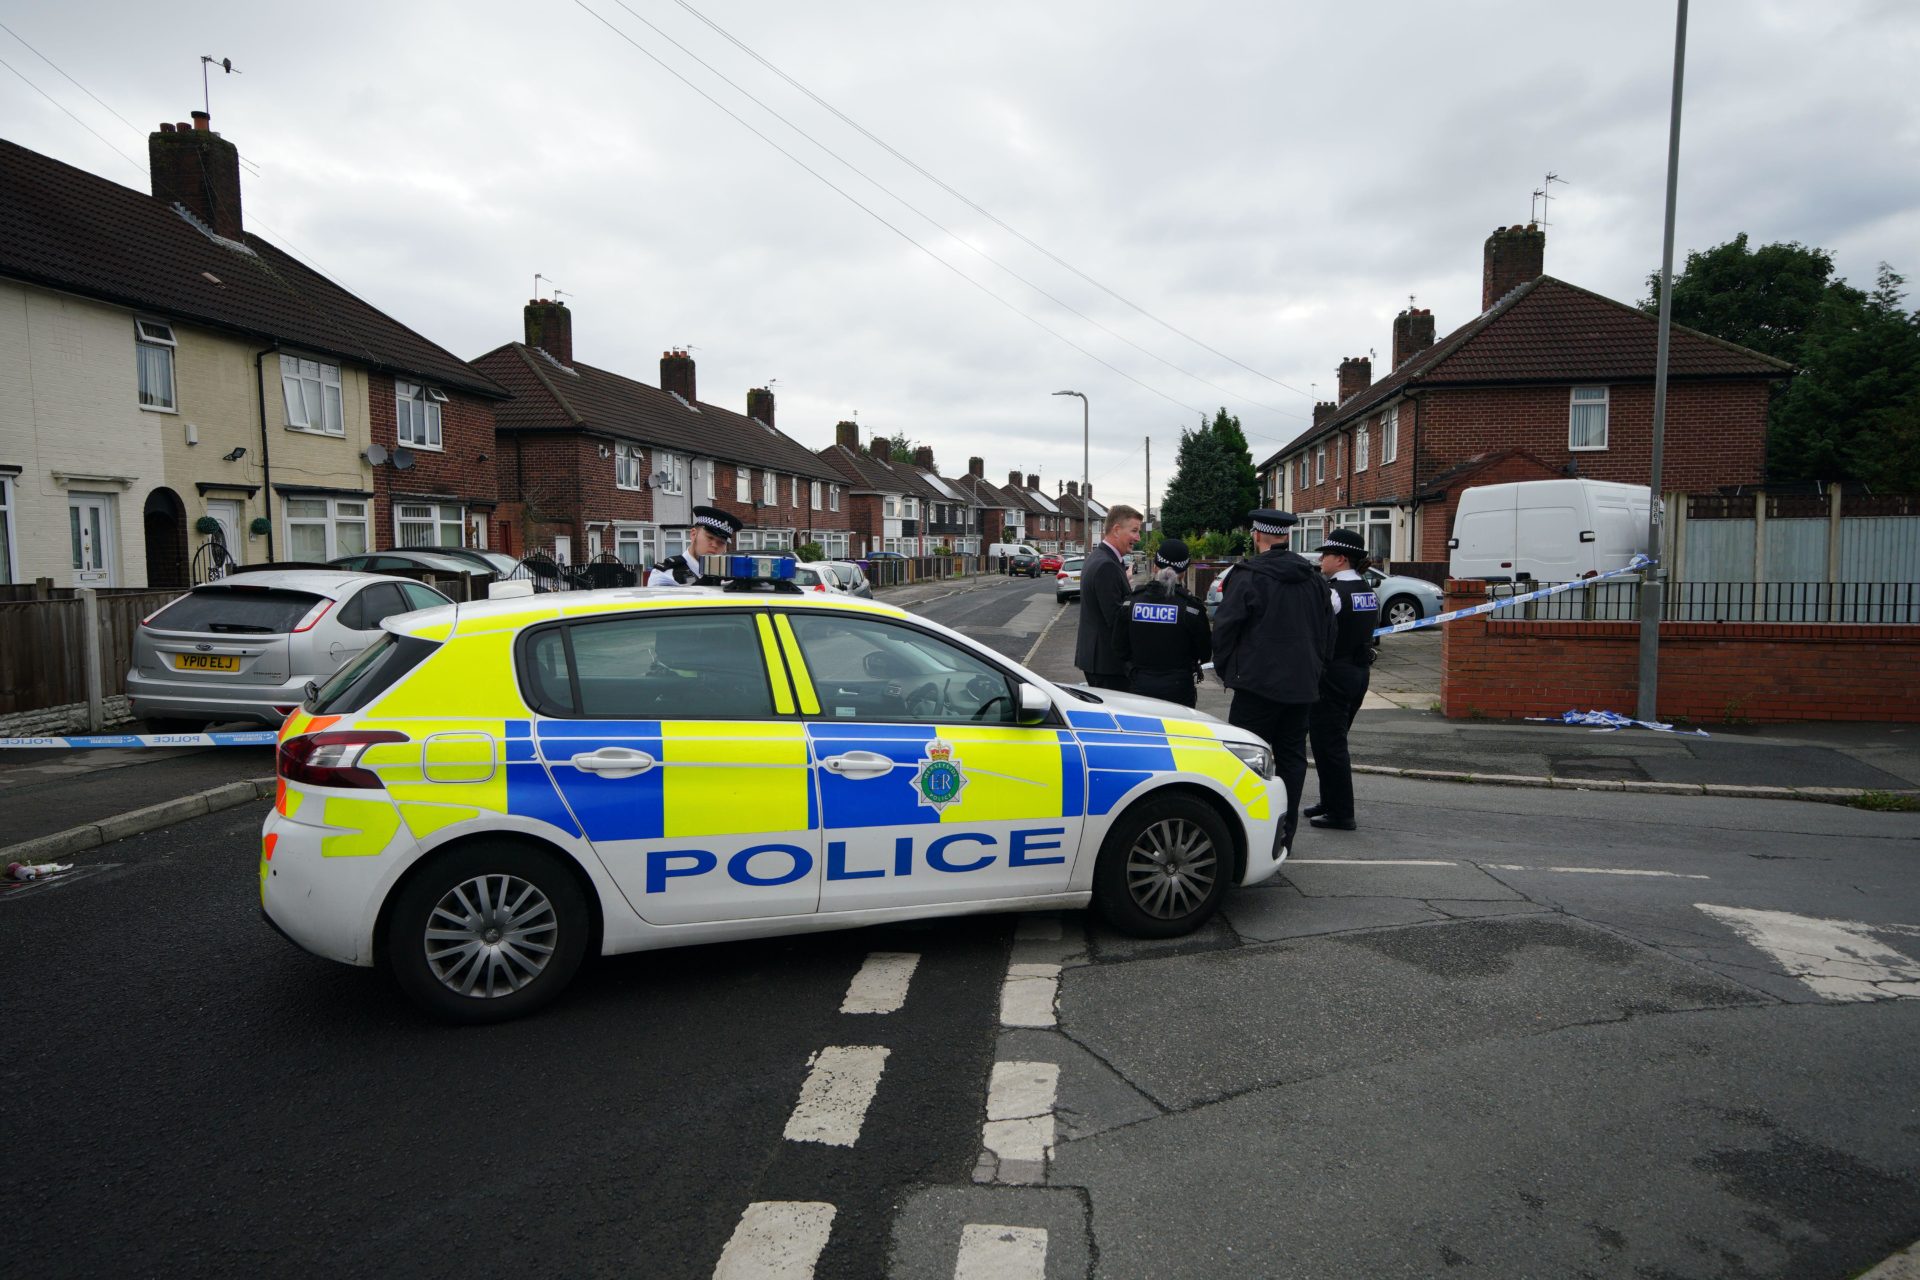 Police at the scene in Knotty Ash, Liverpool, where a nine-year-old girl has been shot dead.